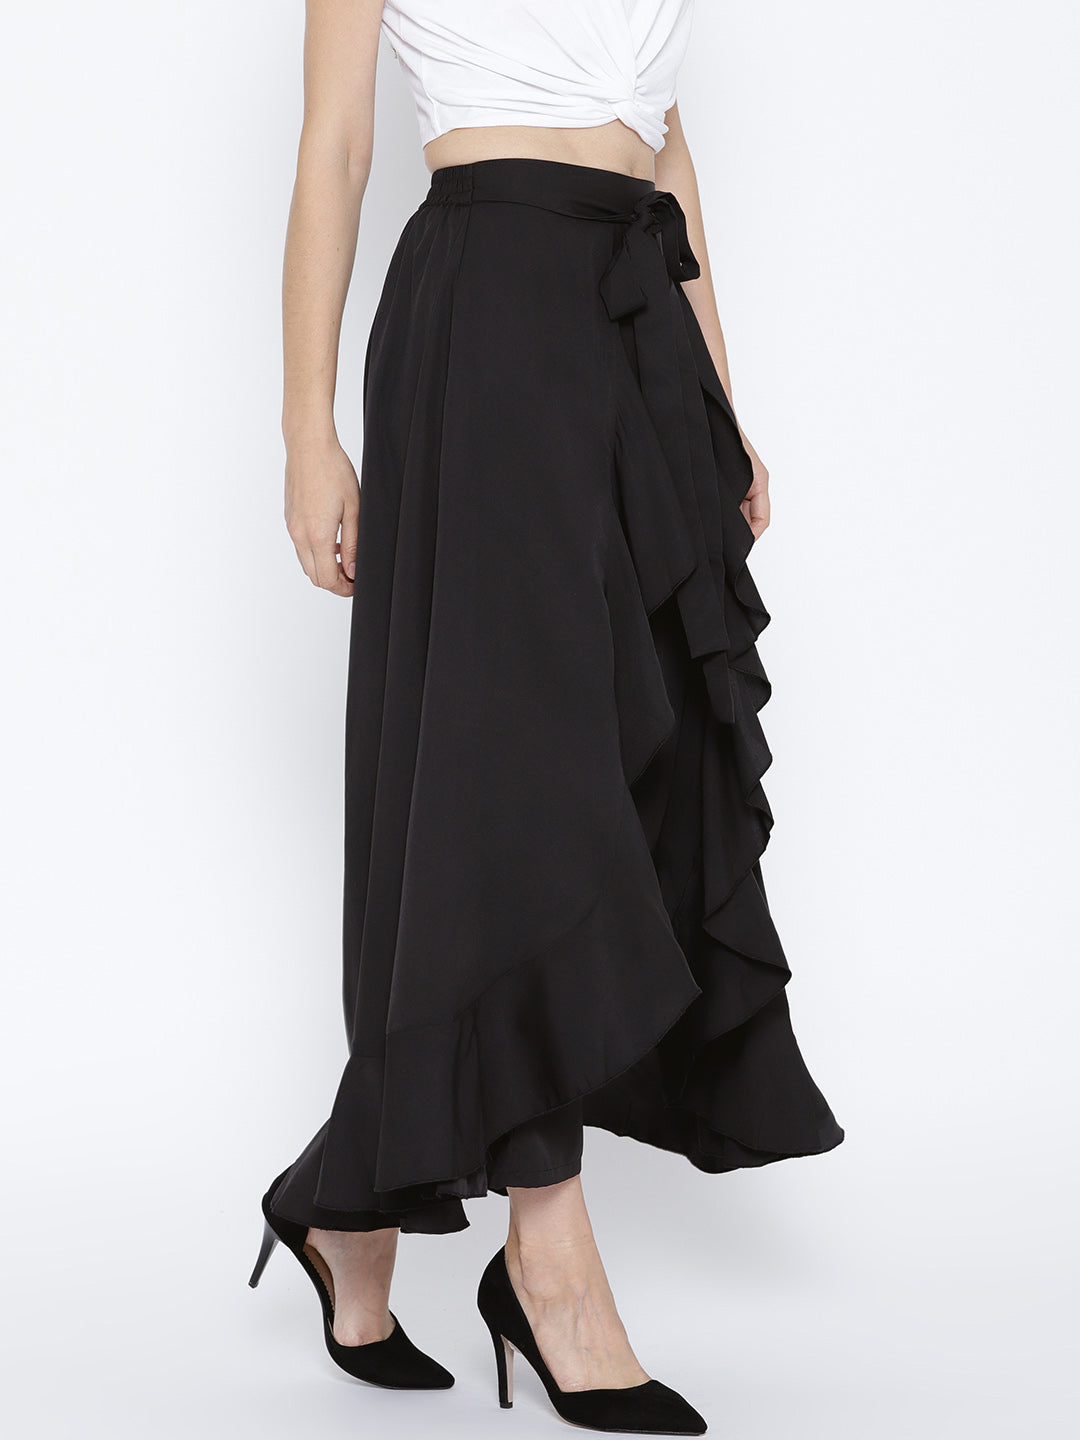 Berrylush Women Black Solid Ruffled Flared Maxi Skirt with Attached Tr